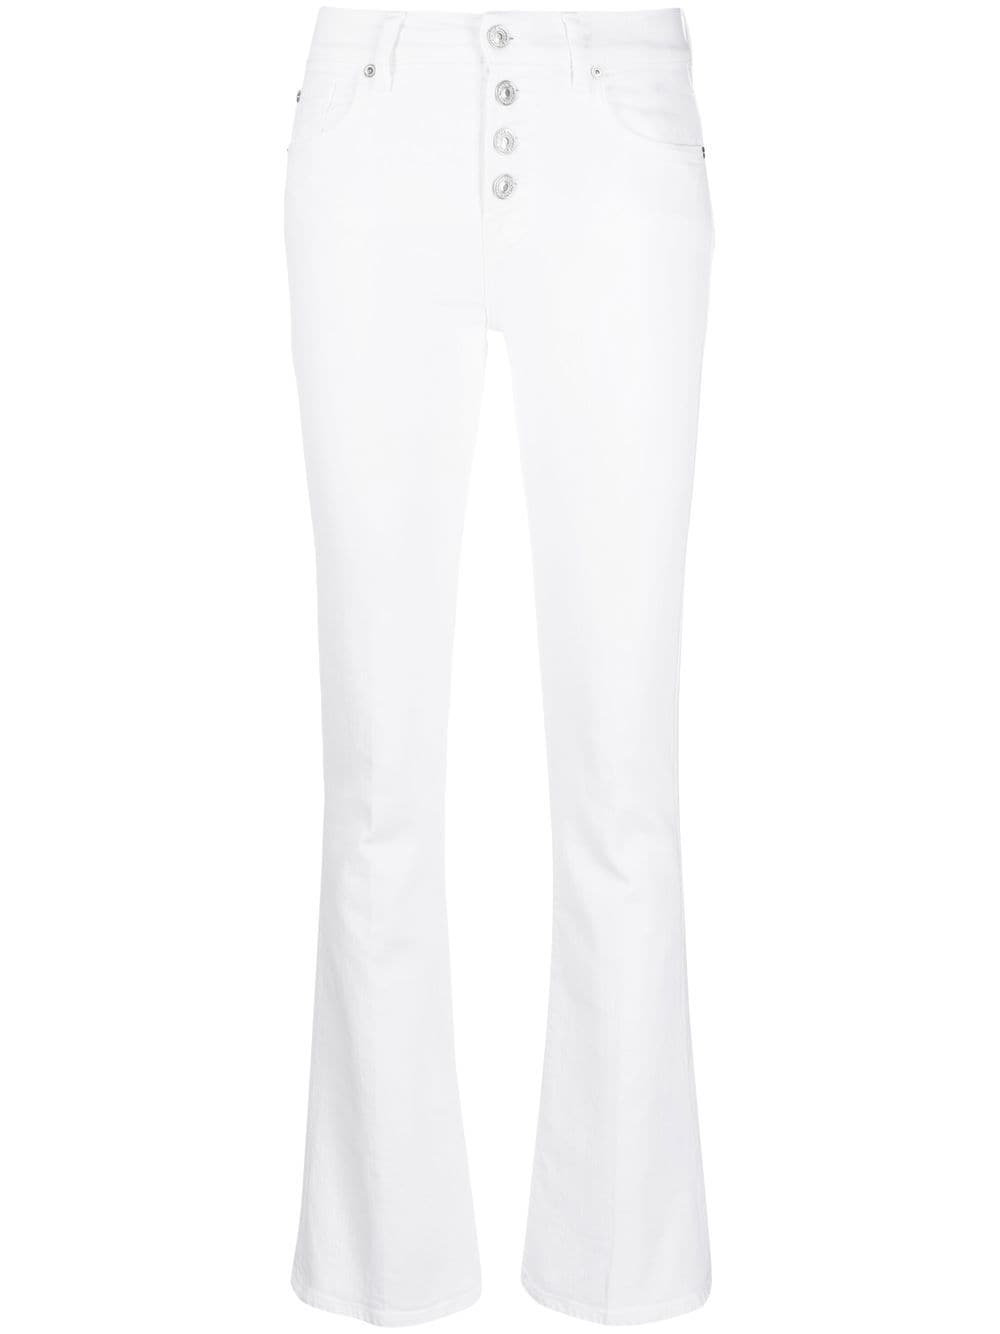 7 For All Mankind high-waisted flared jeans - White von 7 For All Mankind